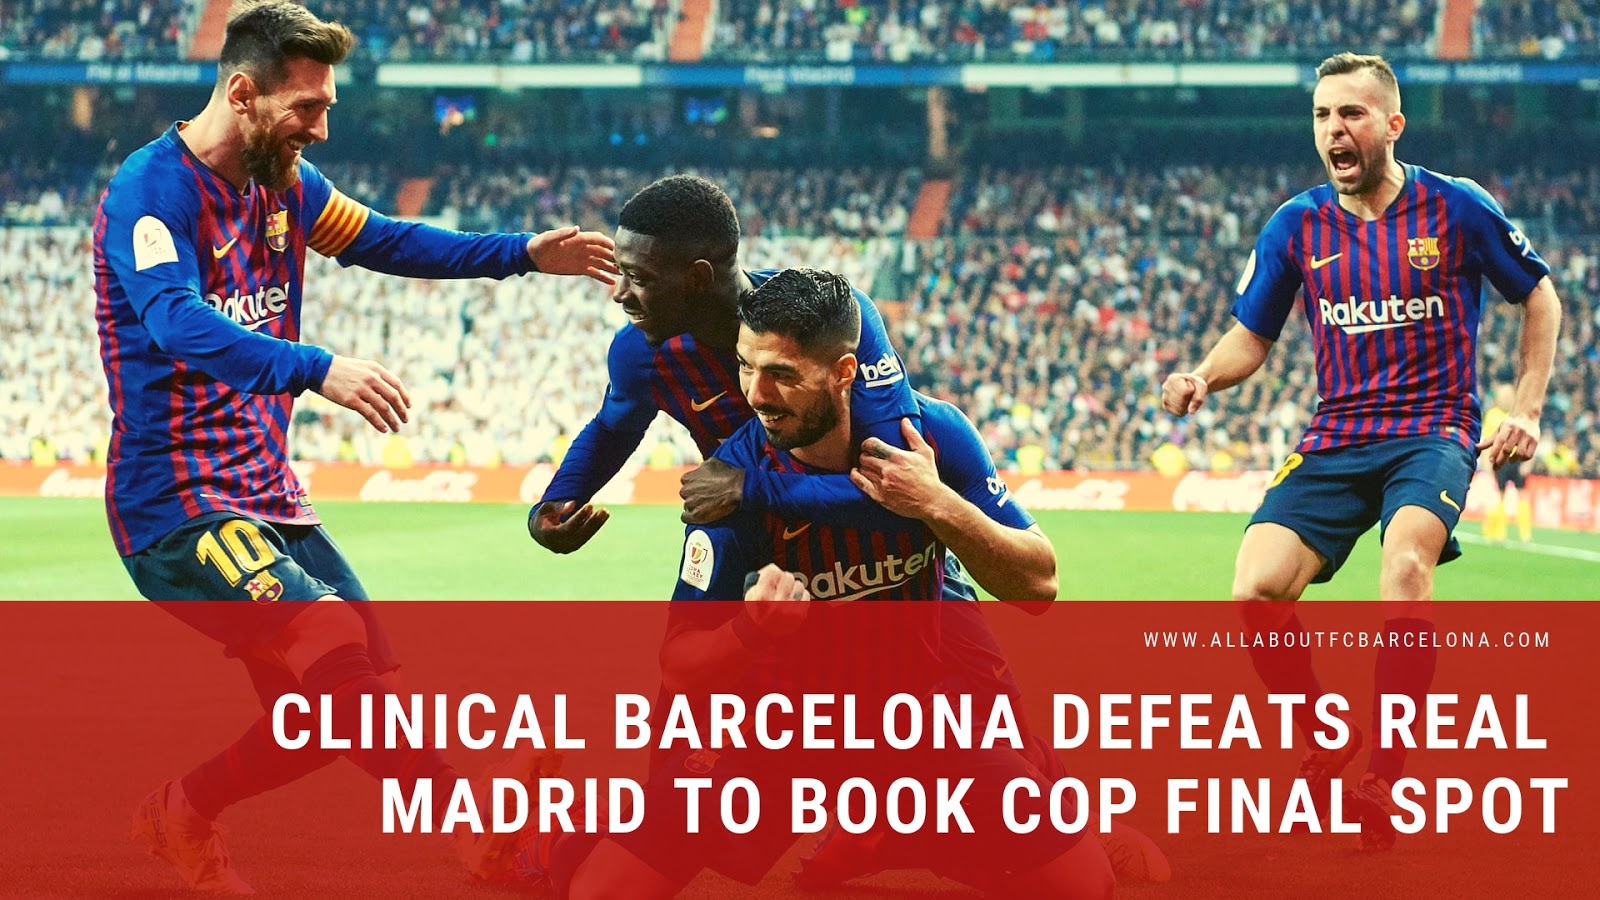 Clinical Barcelona makes the most of their Chances to Defeat Real Madrid